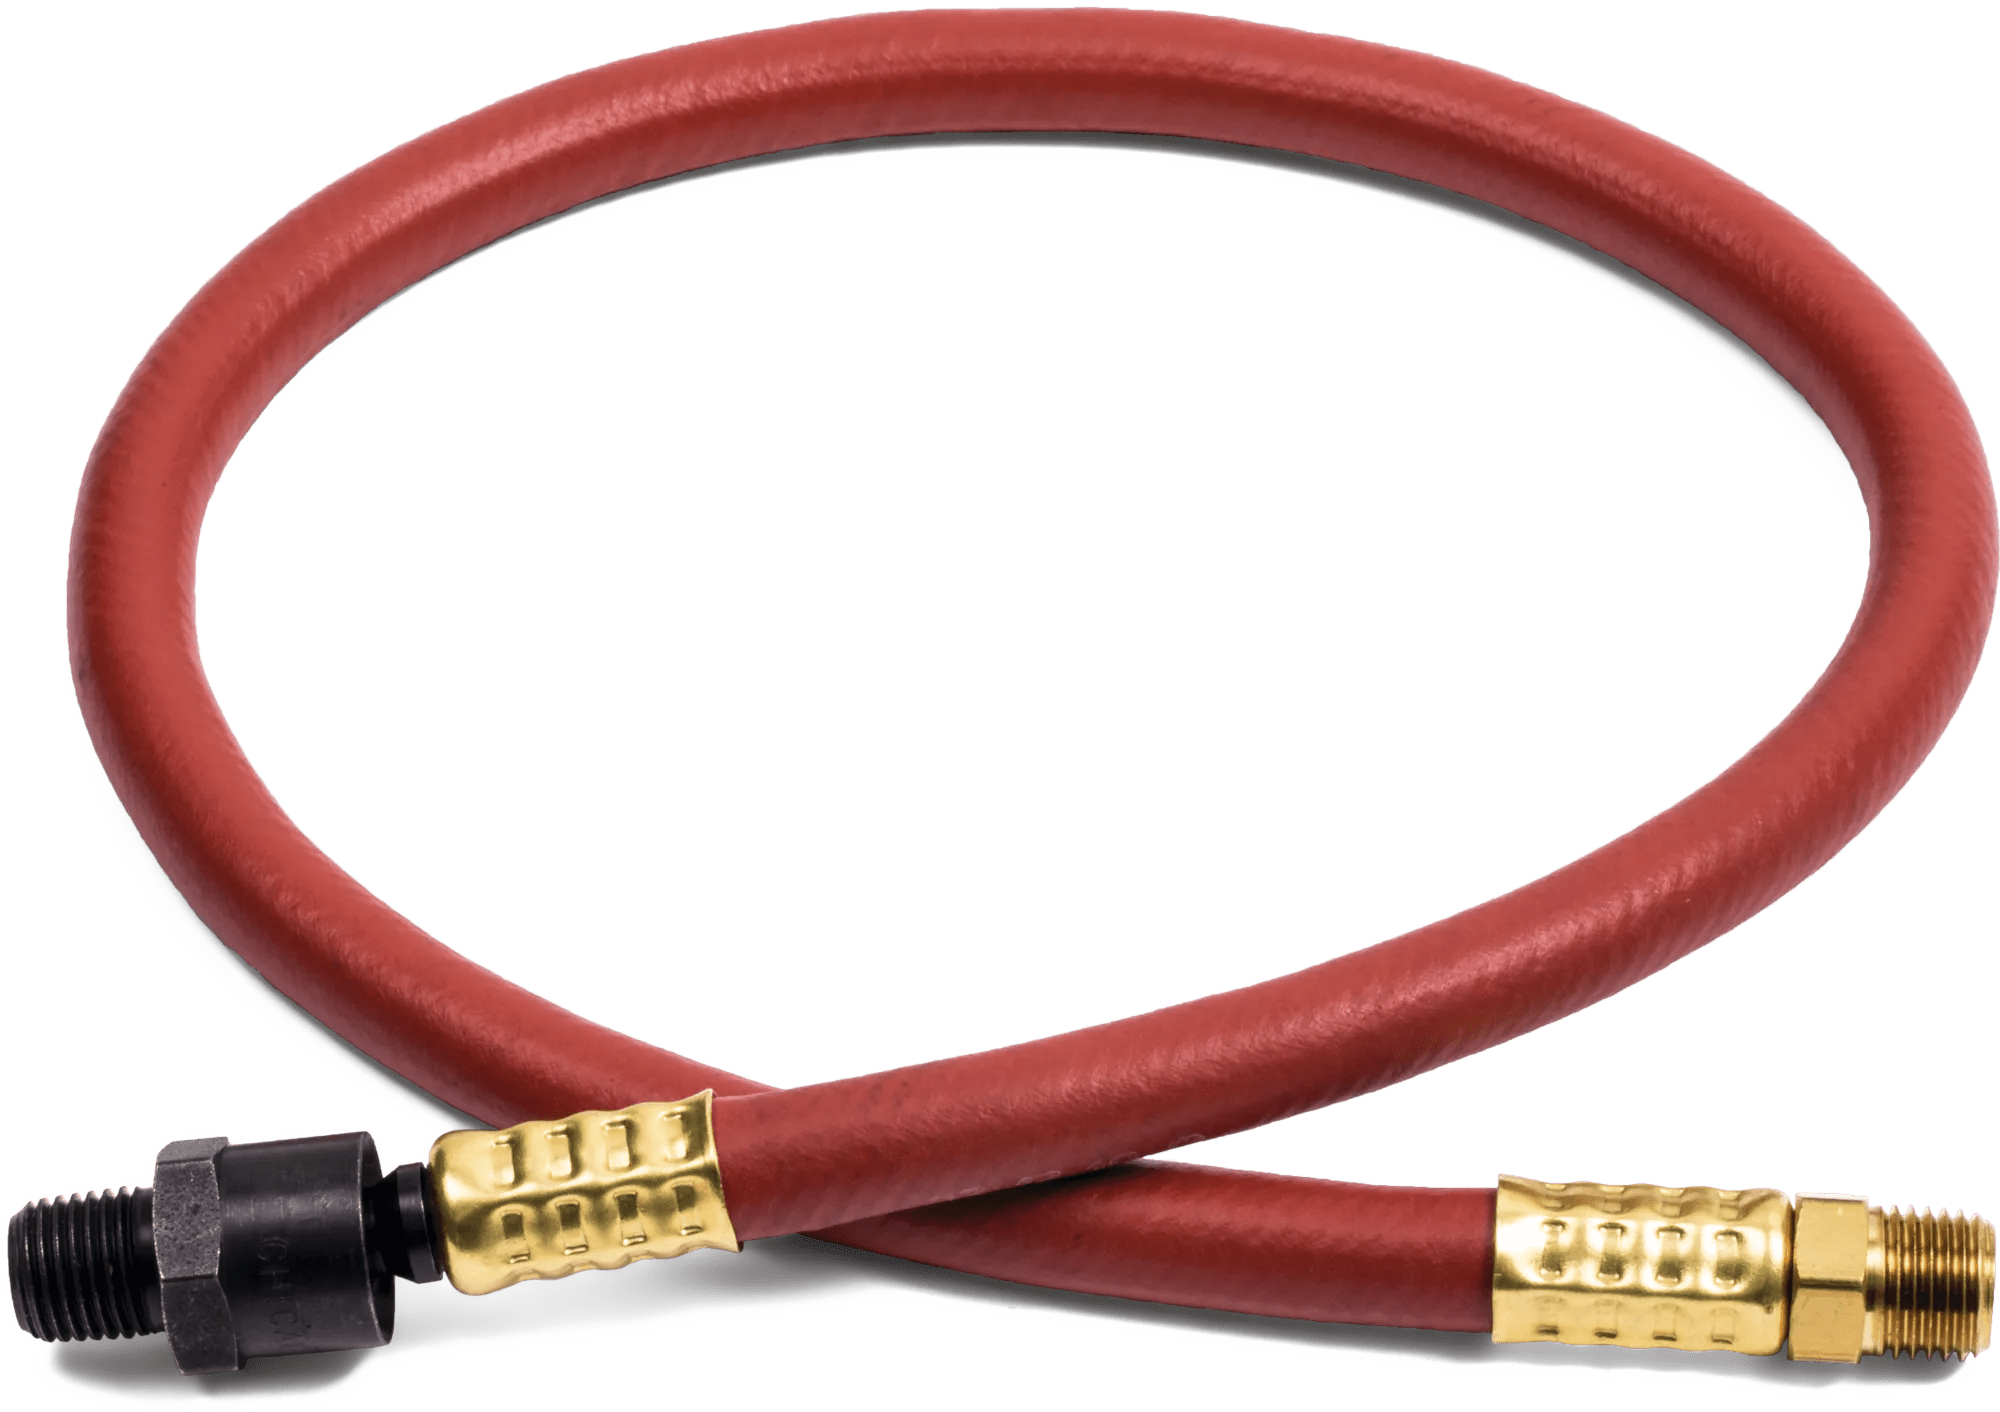 1/4" Snubber Hose with 1/4" Fittings - 2 Feet